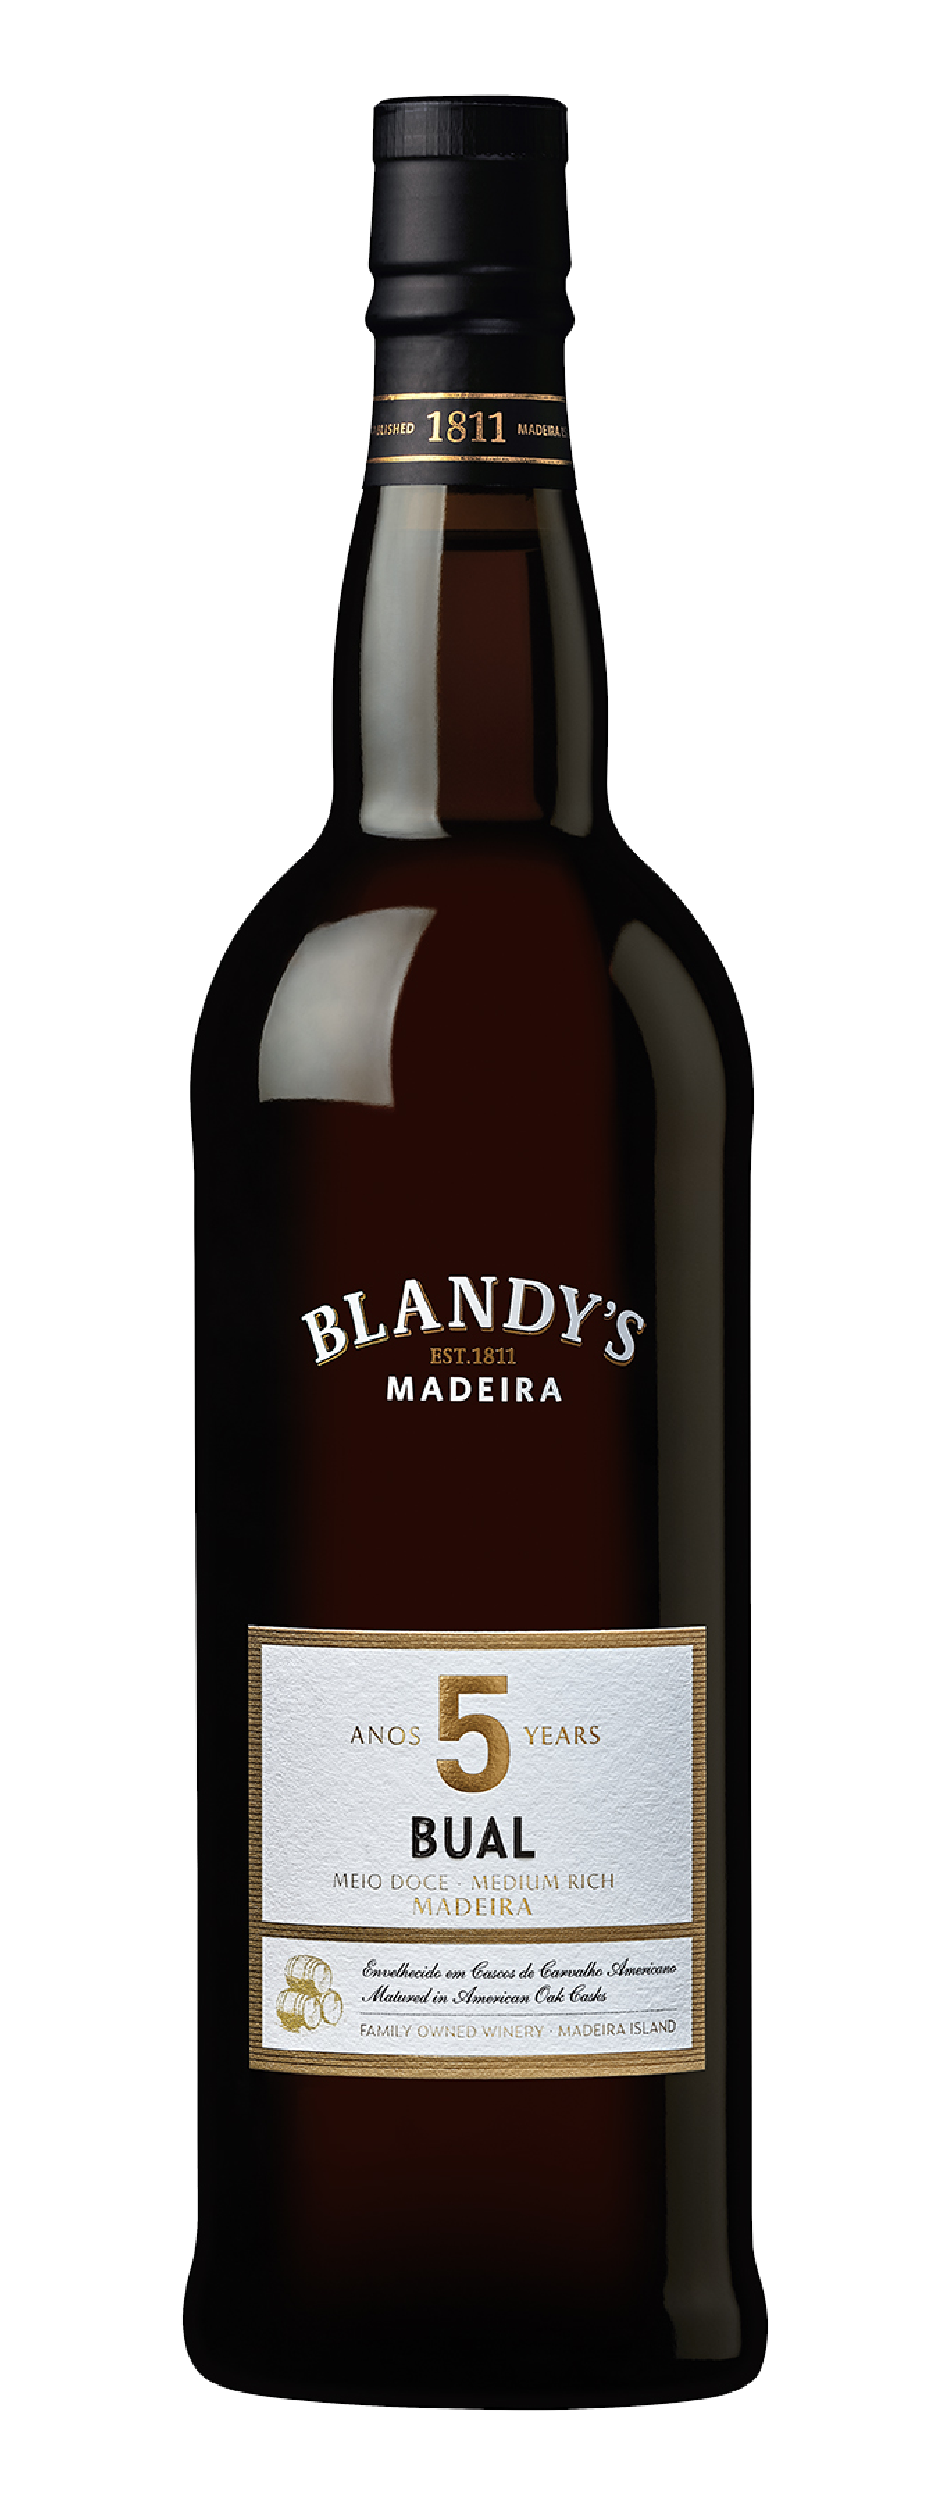 Product Image for BLANDY'S BUAL 5 YEAR OLD